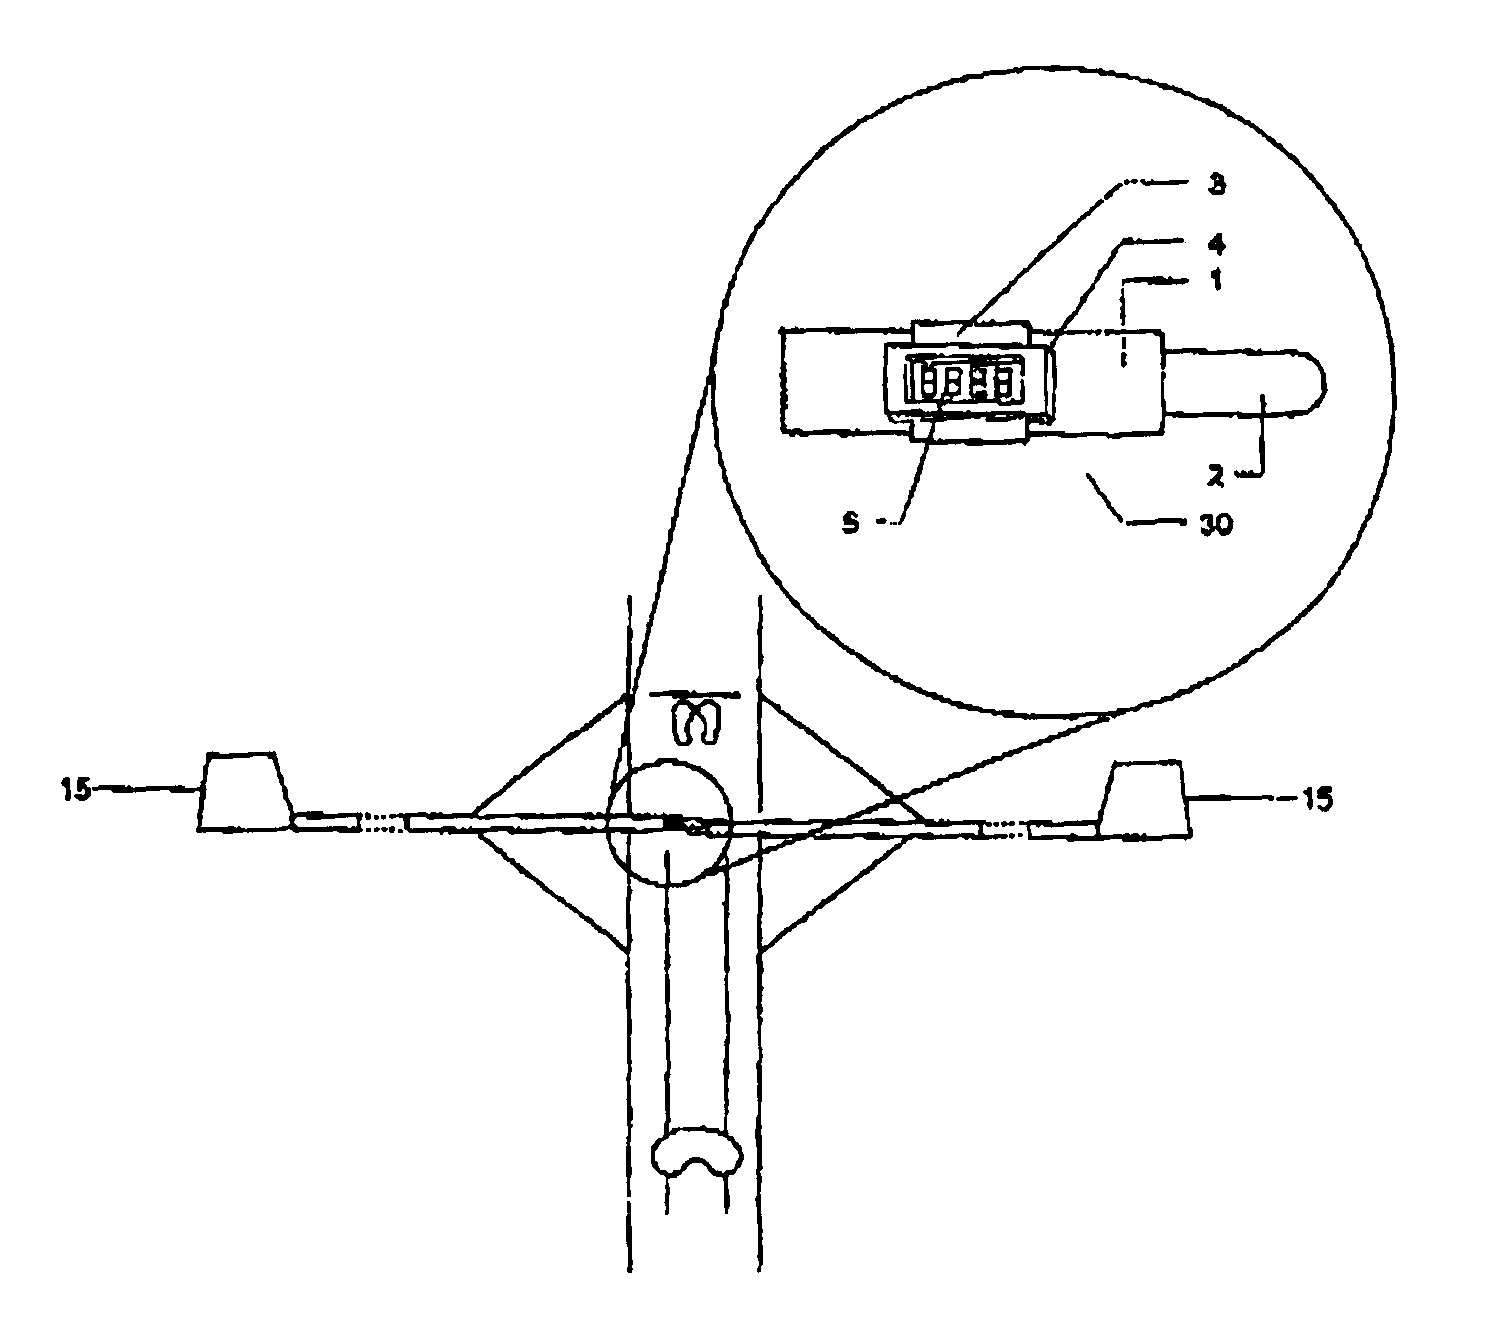 Method and apparatus for measuring stroke rating in rowing